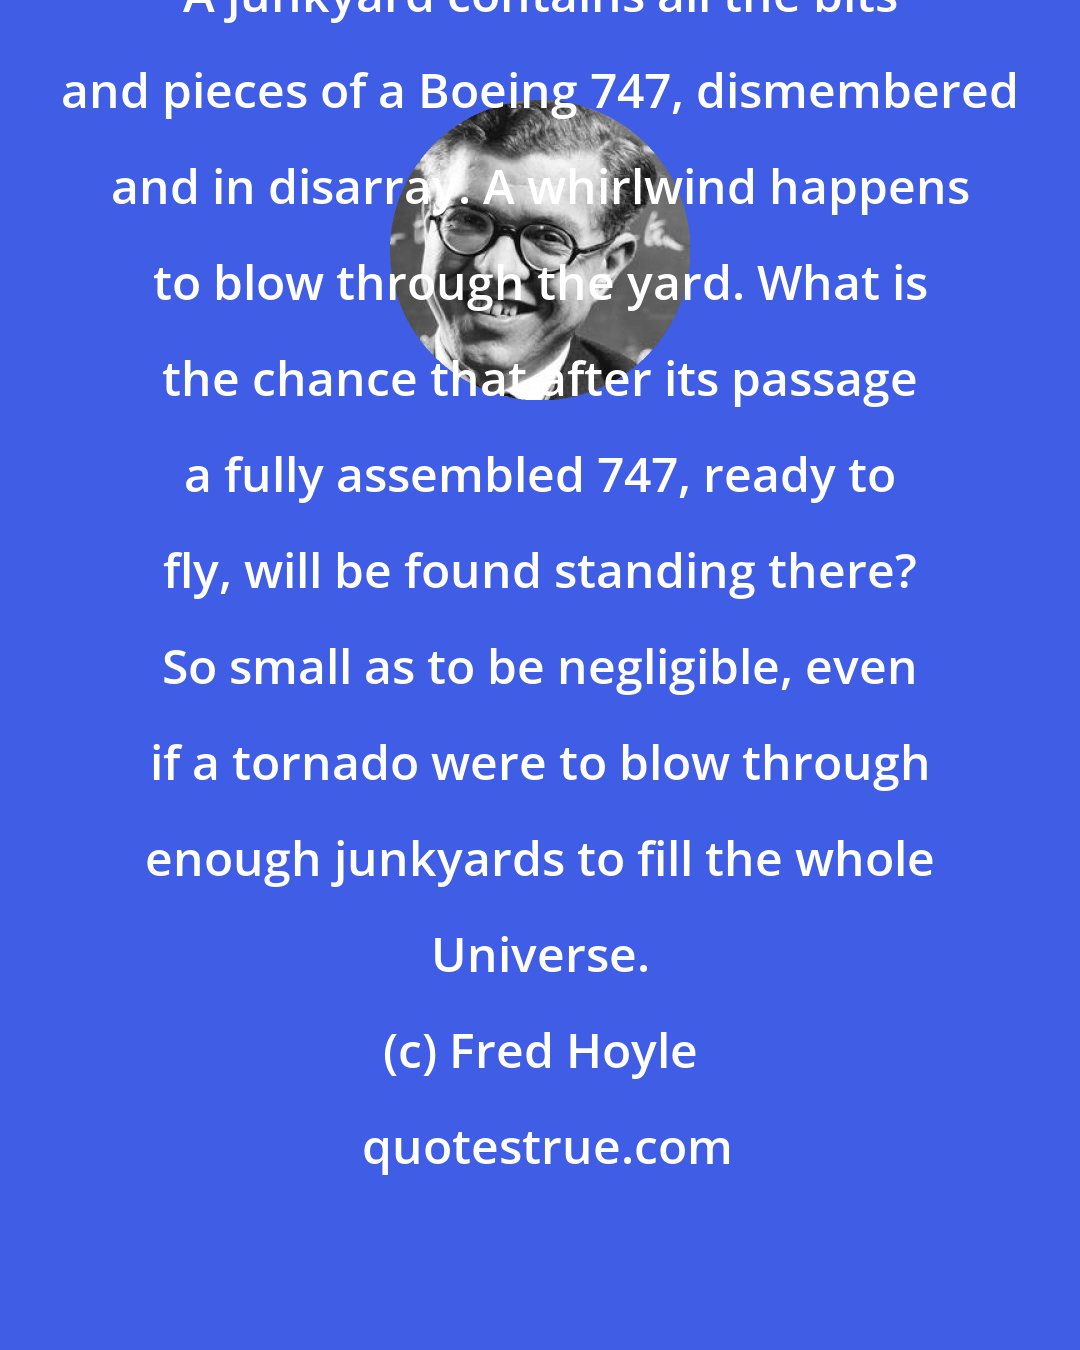 Fred Hoyle: A junkyard contains all the bits and pieces of a Boeing 747, dismembered and in disarray. A whirlwind happens to blow through the yard. What is the chance that after its passage a fully assembled 747, ready to fly, will be found standing there? So small as to be negligible, even if a tornado were to blow through enough junkyards to fill the whole Universe.